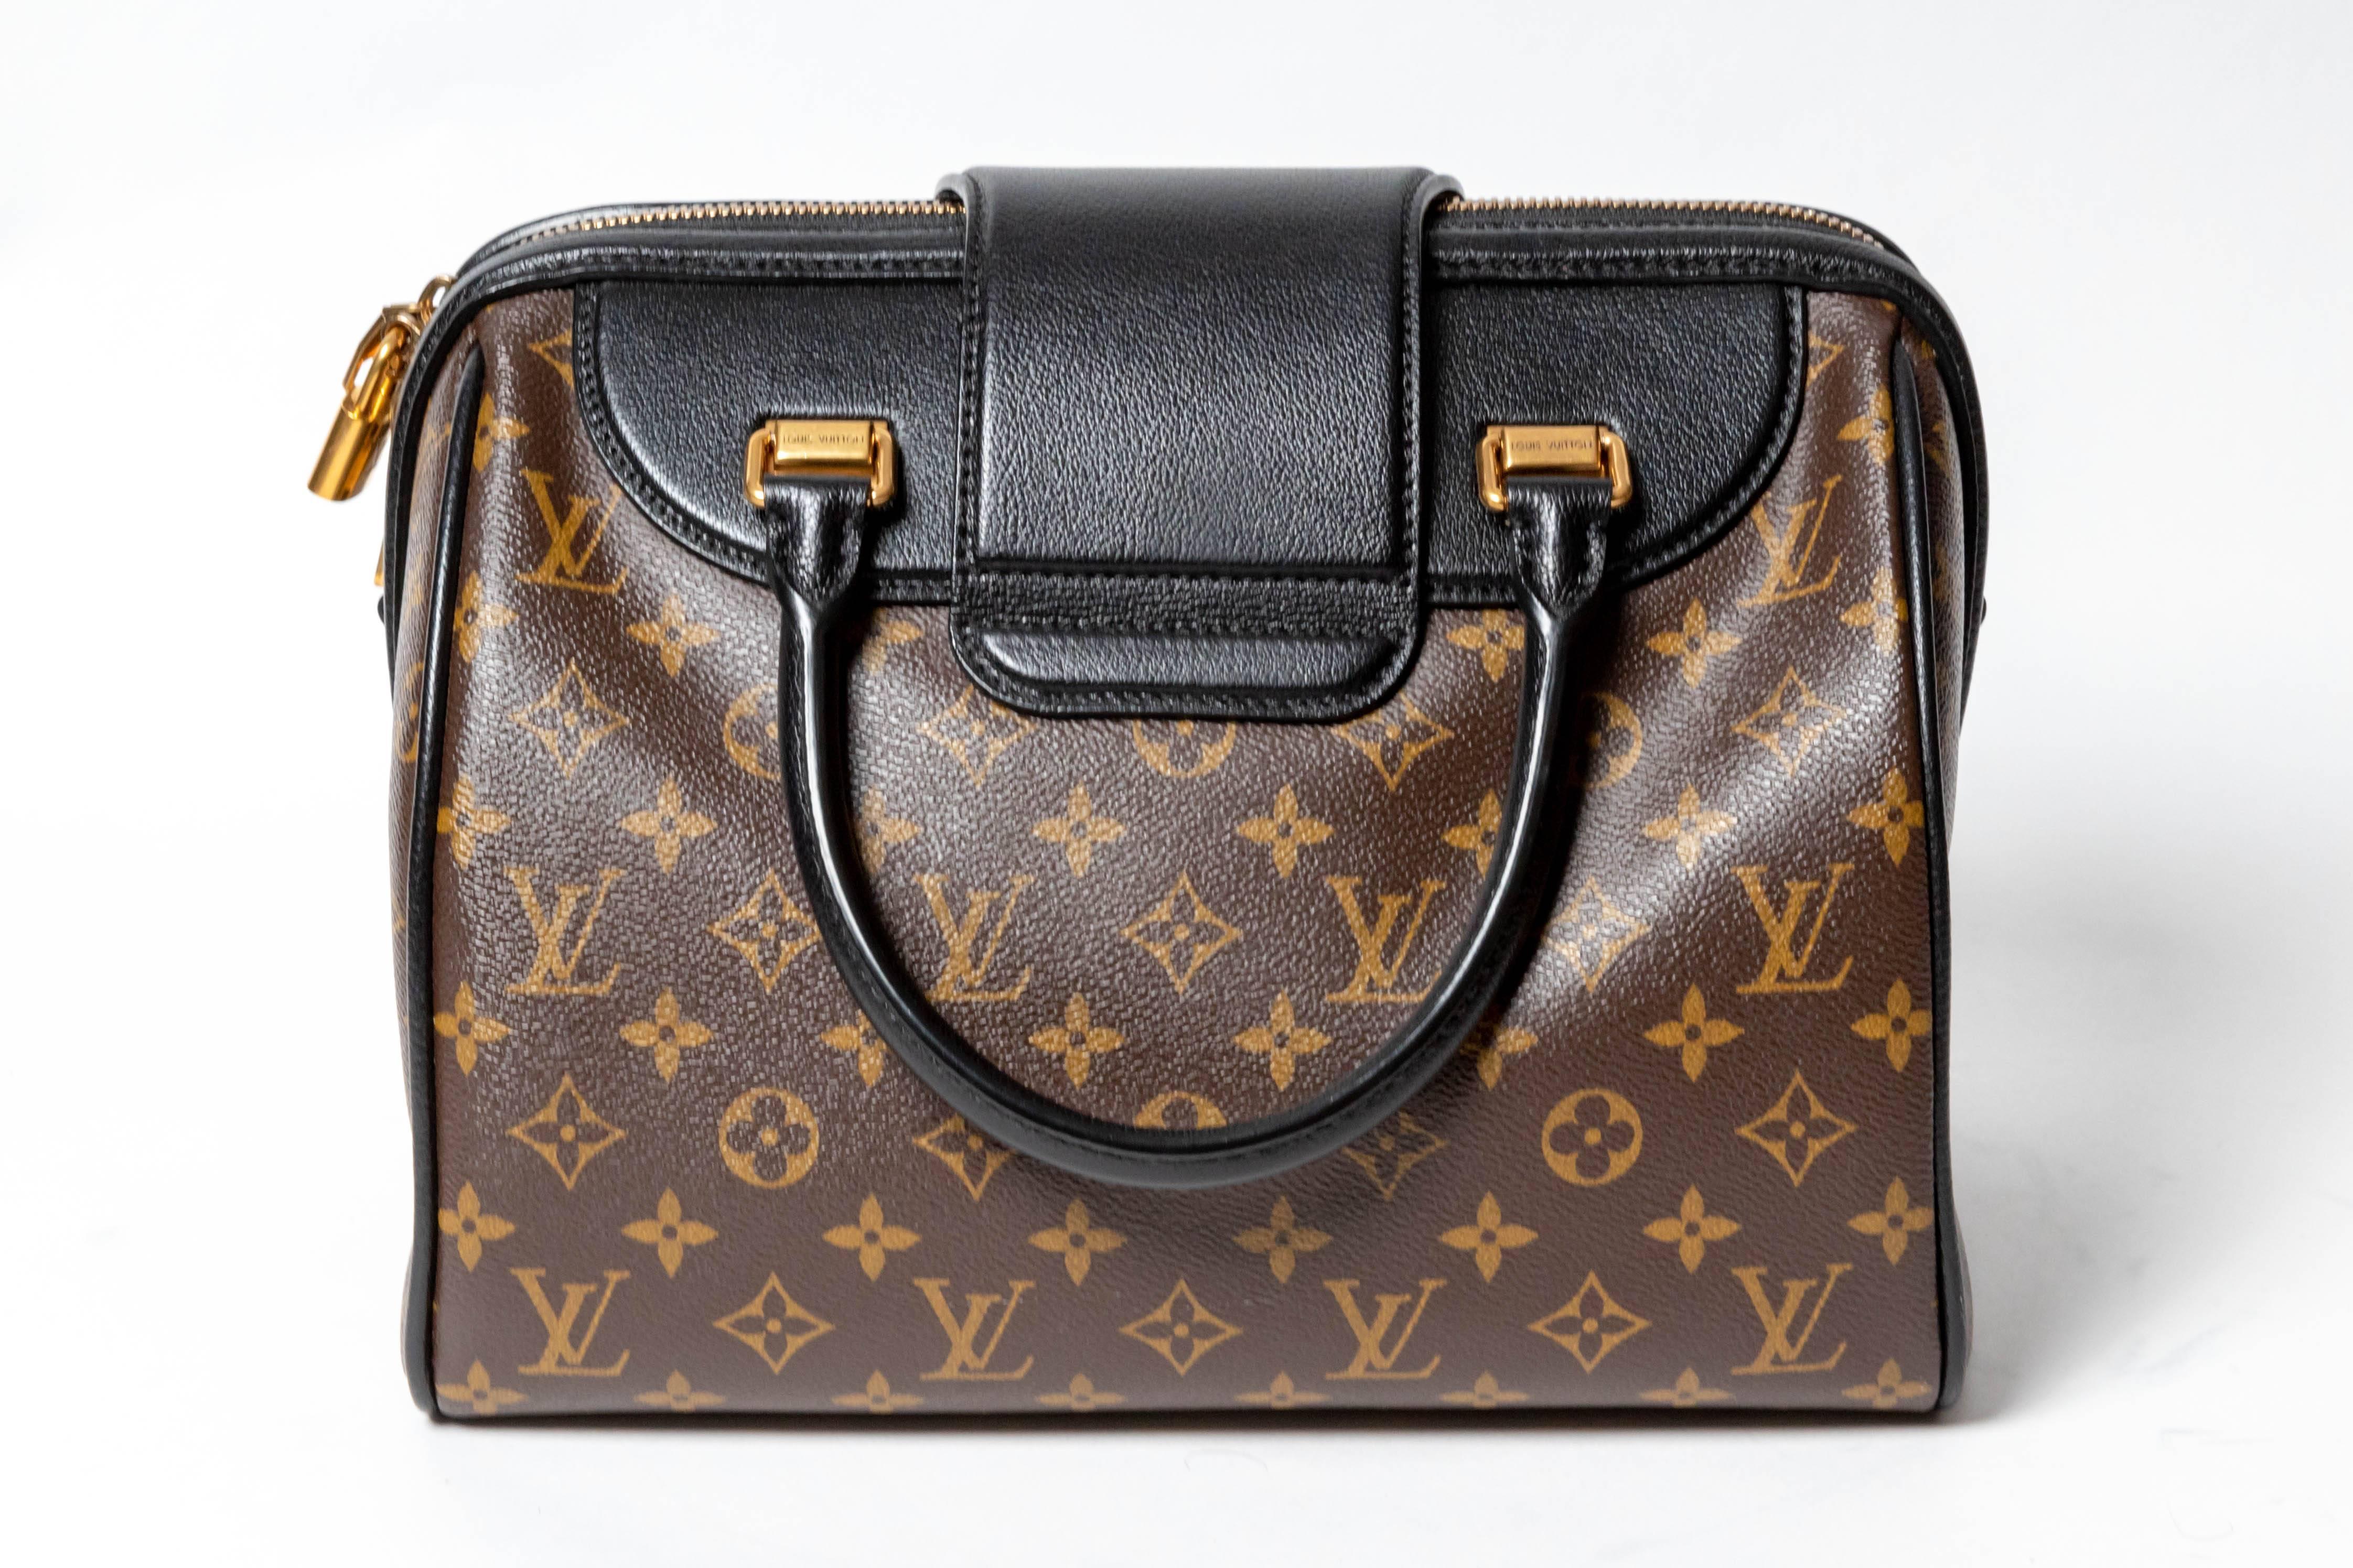 Louis Vuitton Golden Arrow Speedy Bag  In Excellent Condition For Sale In Westhampton Beach, NY